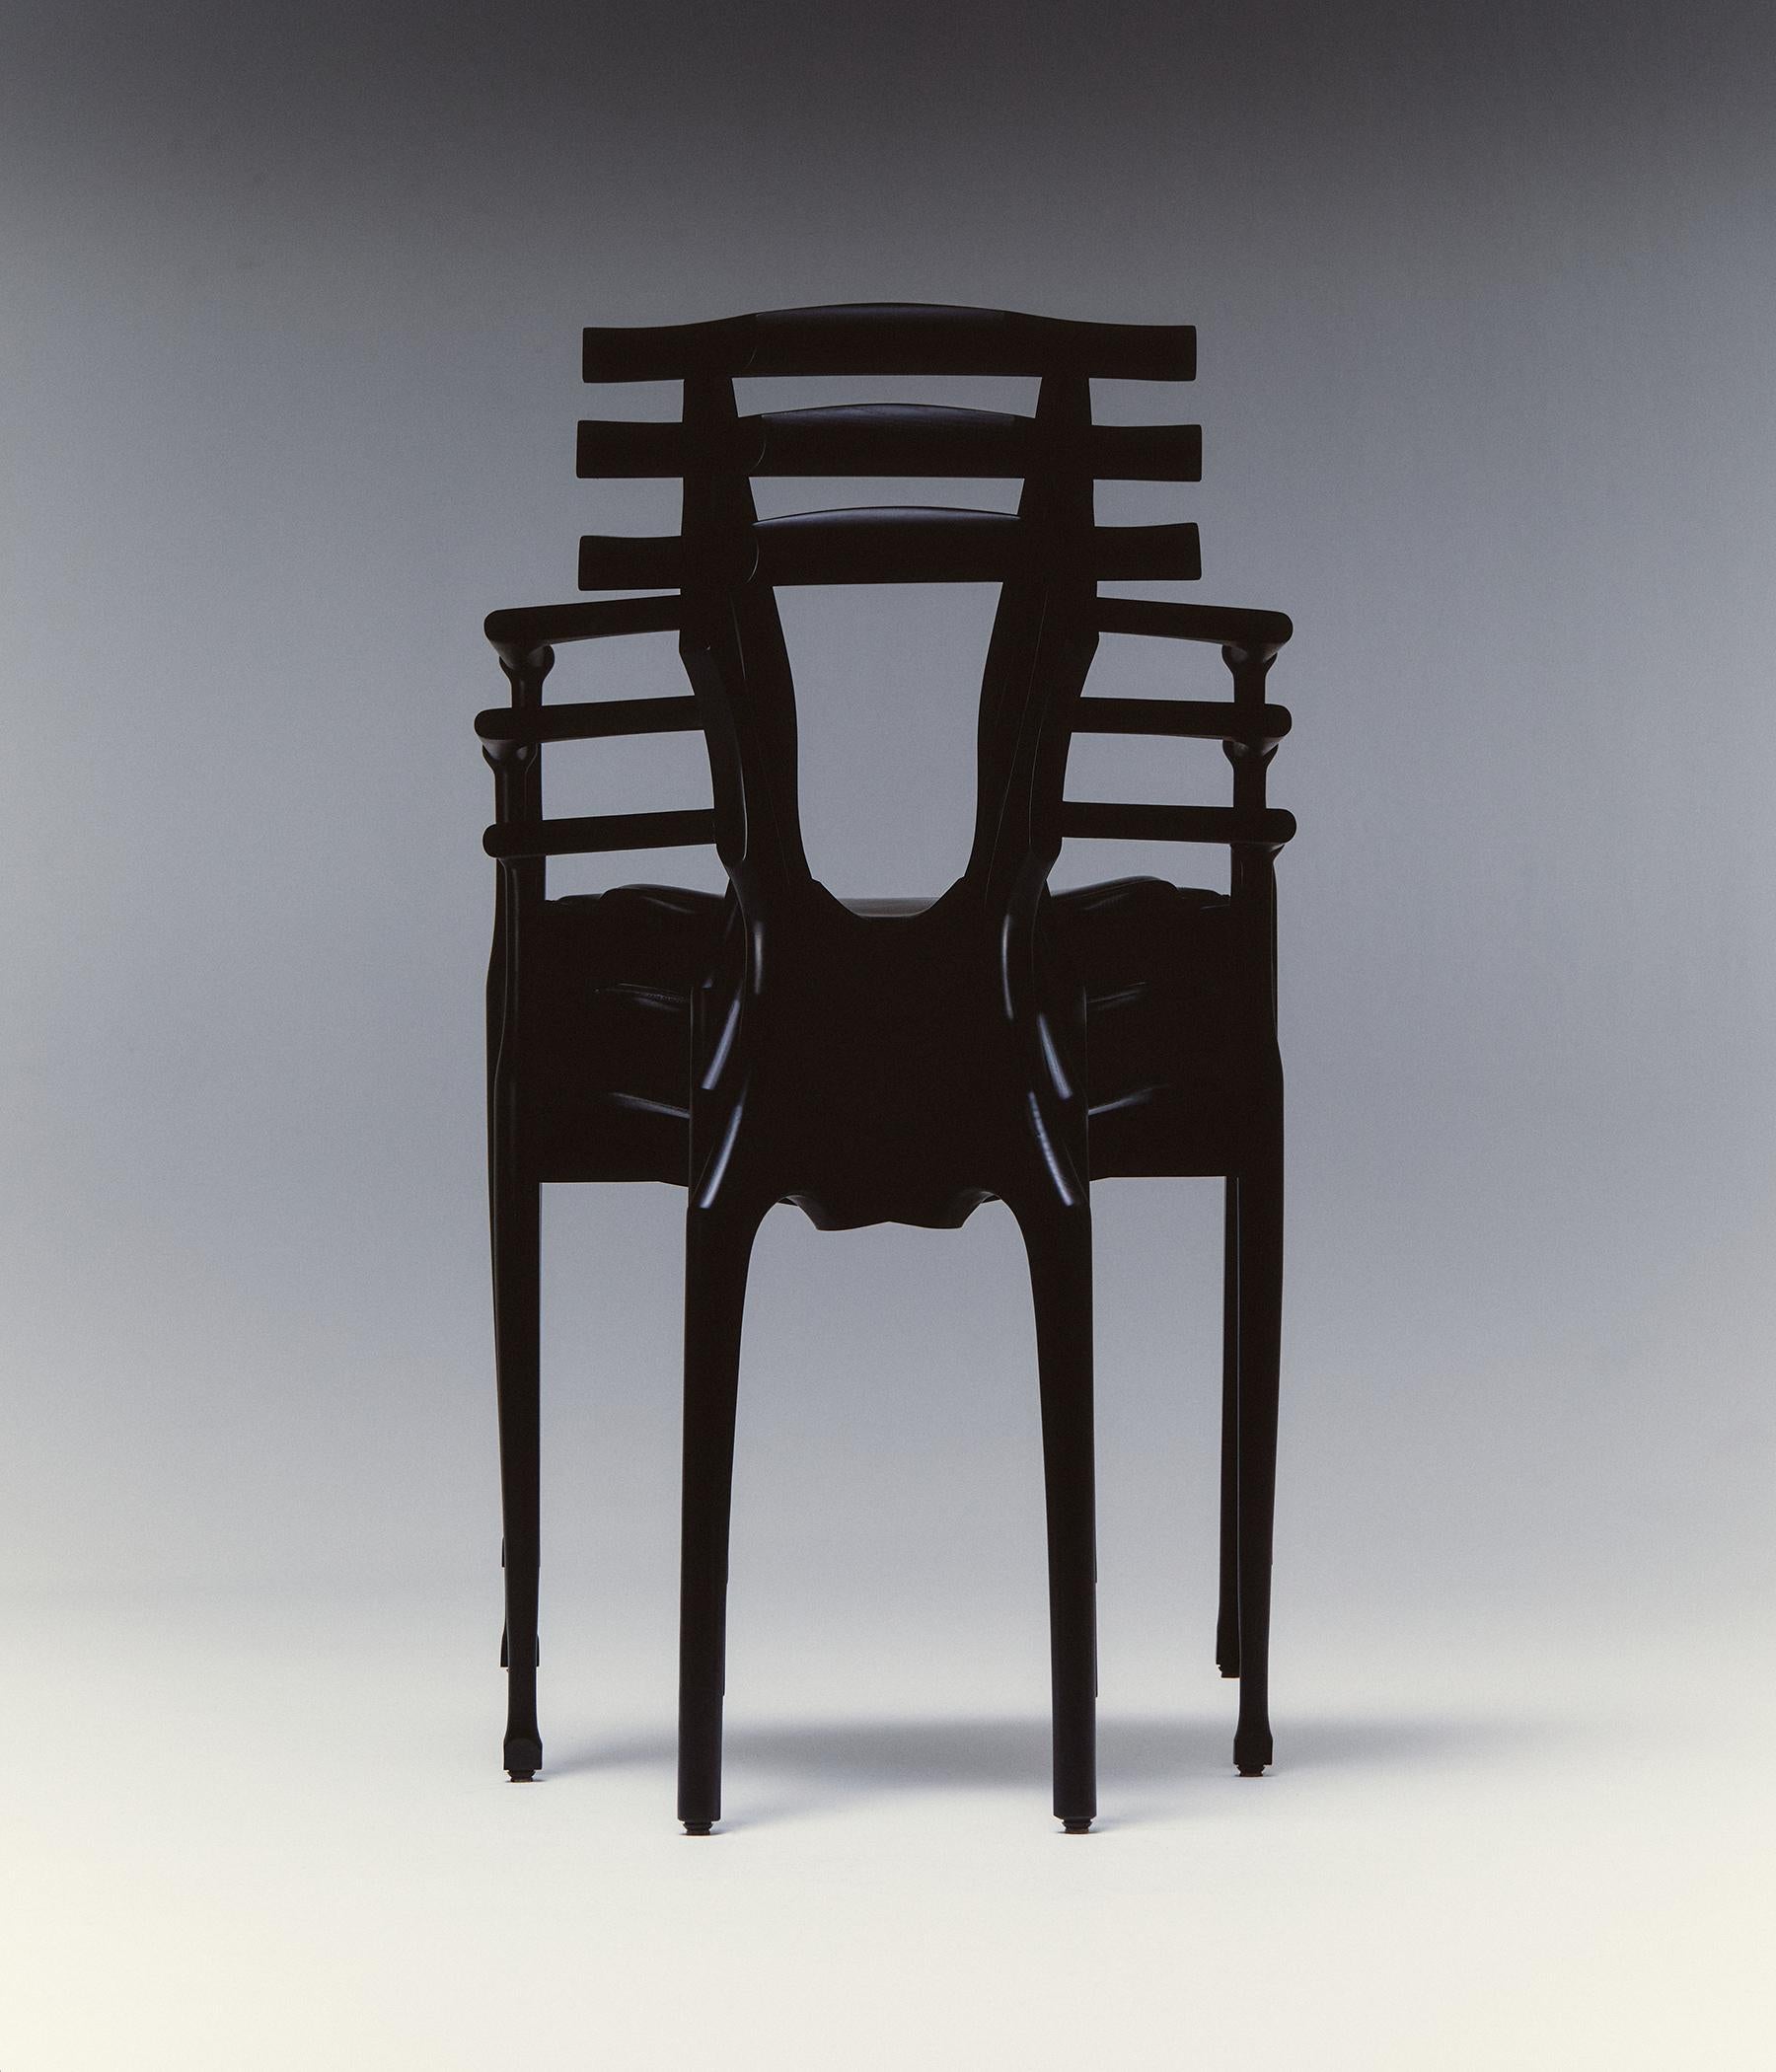 Gaulino chair by Oscar Tusquets ash wood black lacquer leather hide seat, Spain For Sale 2